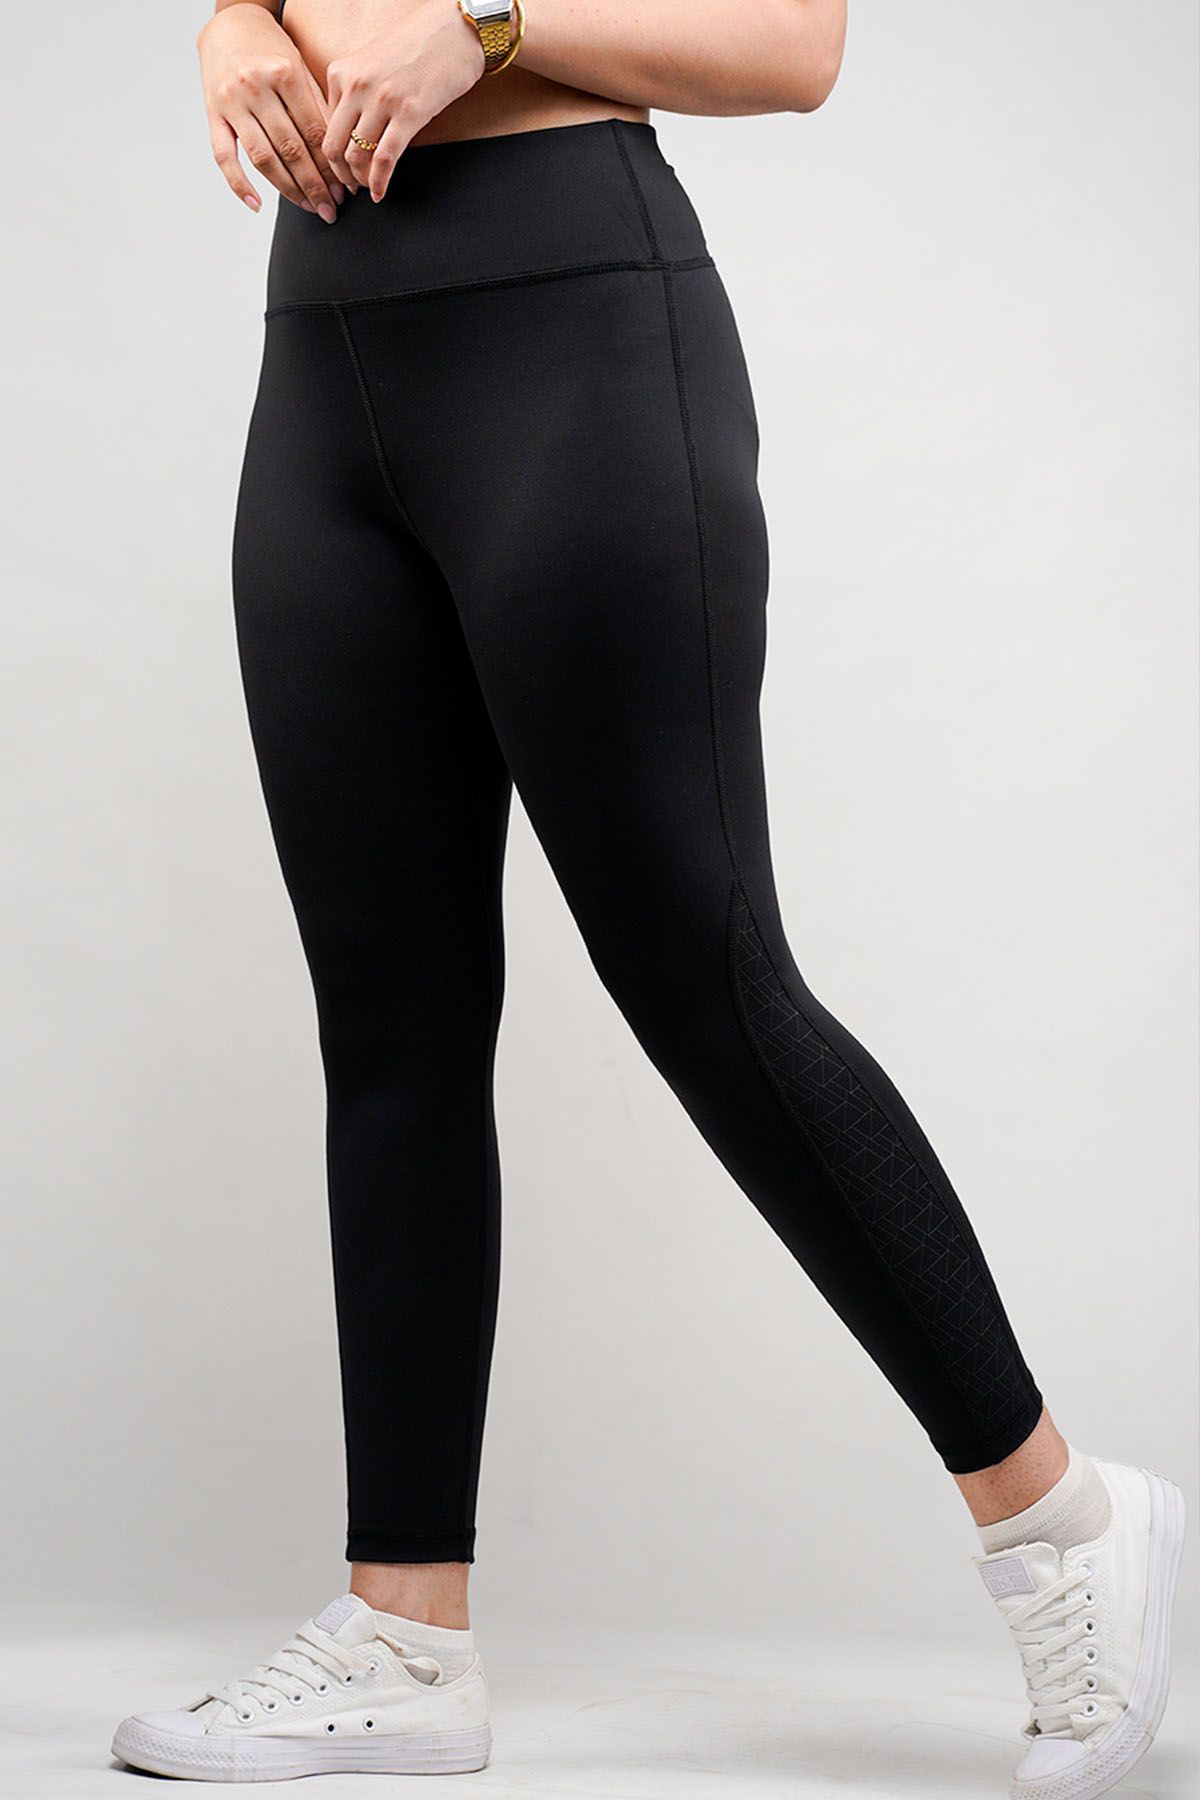 Charcoal Gray High Waist Compression Plus Size Leggings For Women 